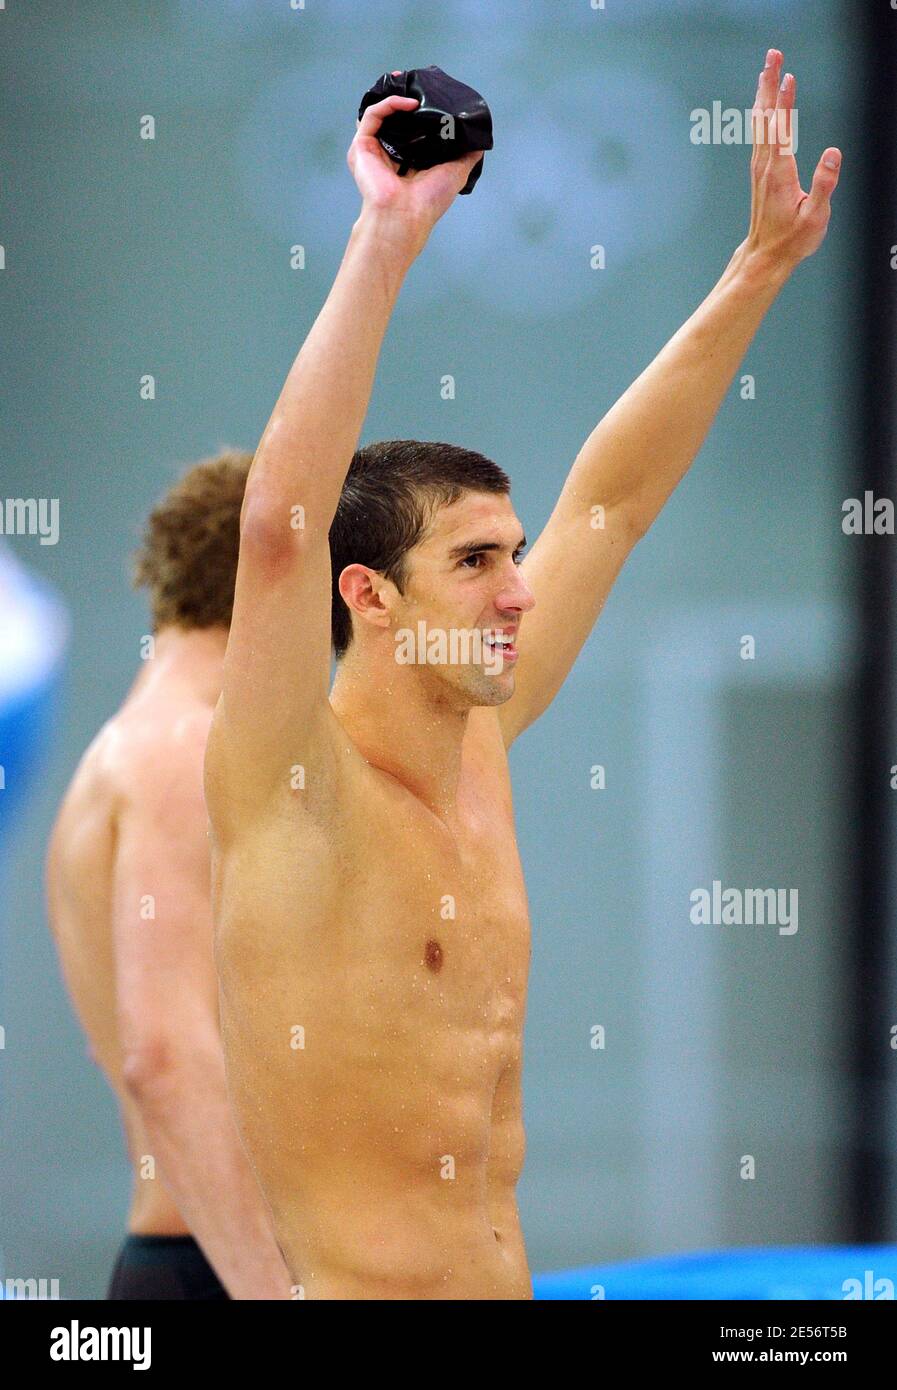 Michael Phelps of the United States celebrates after winning gold medals in the Men's 4x100 Medley Relay at the XXIX Beijing Olympic Games Day 9 at the National Aquatic Center in Beijing, China on August 17, 2008. Photo by Gouhier-Hahn-Nebinger/Cameleon/ABACAPRESS.COM Stock Photo